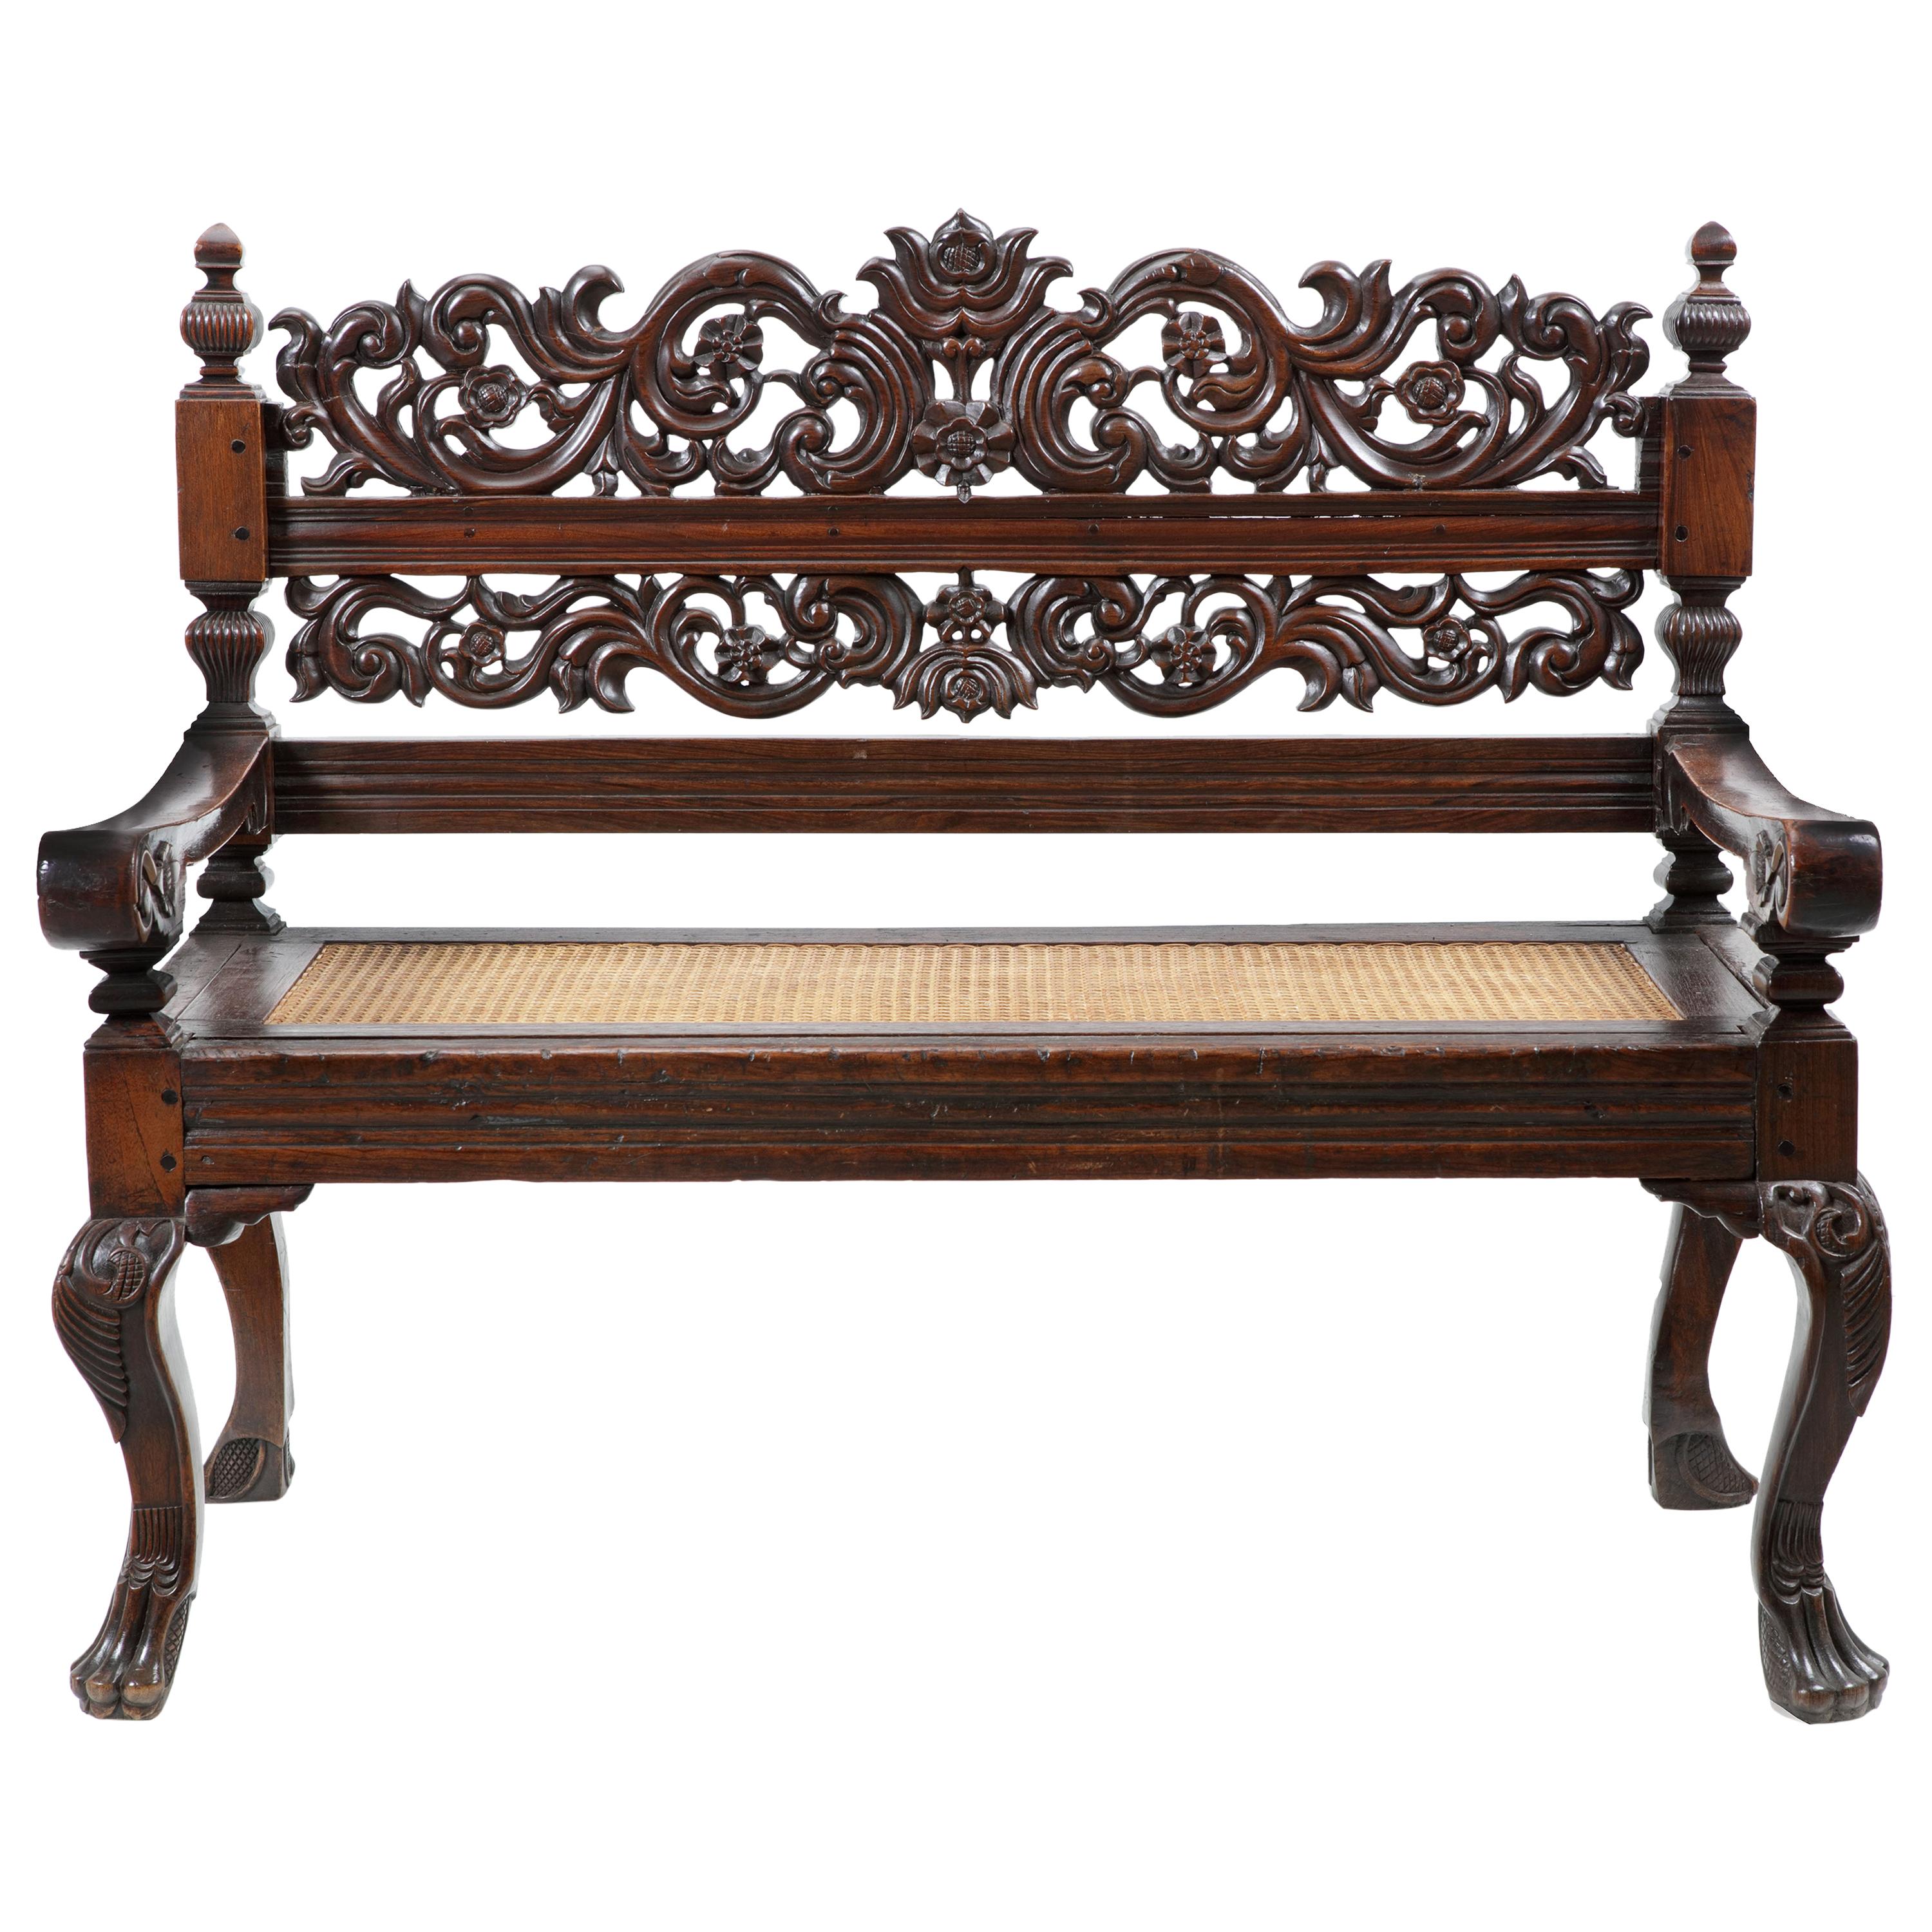 Fine Dutch Colonial Djati Bench, First Half of the 18th Century For Sale